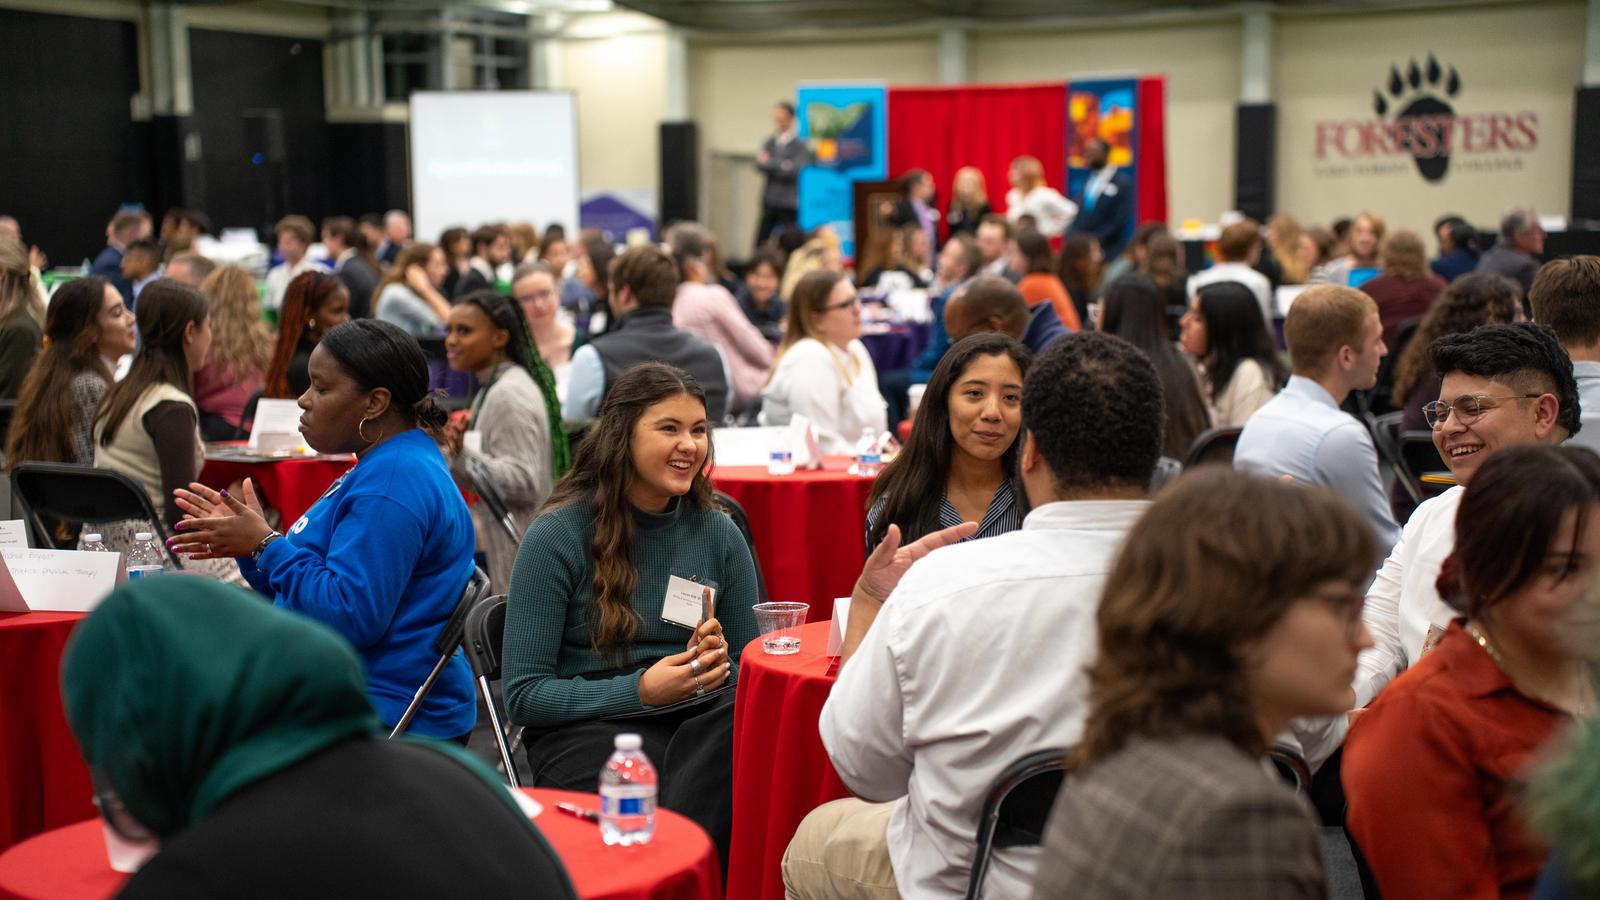 Lake Forest College students meet with professionals from a variety of industries at the annual Speed Networking event